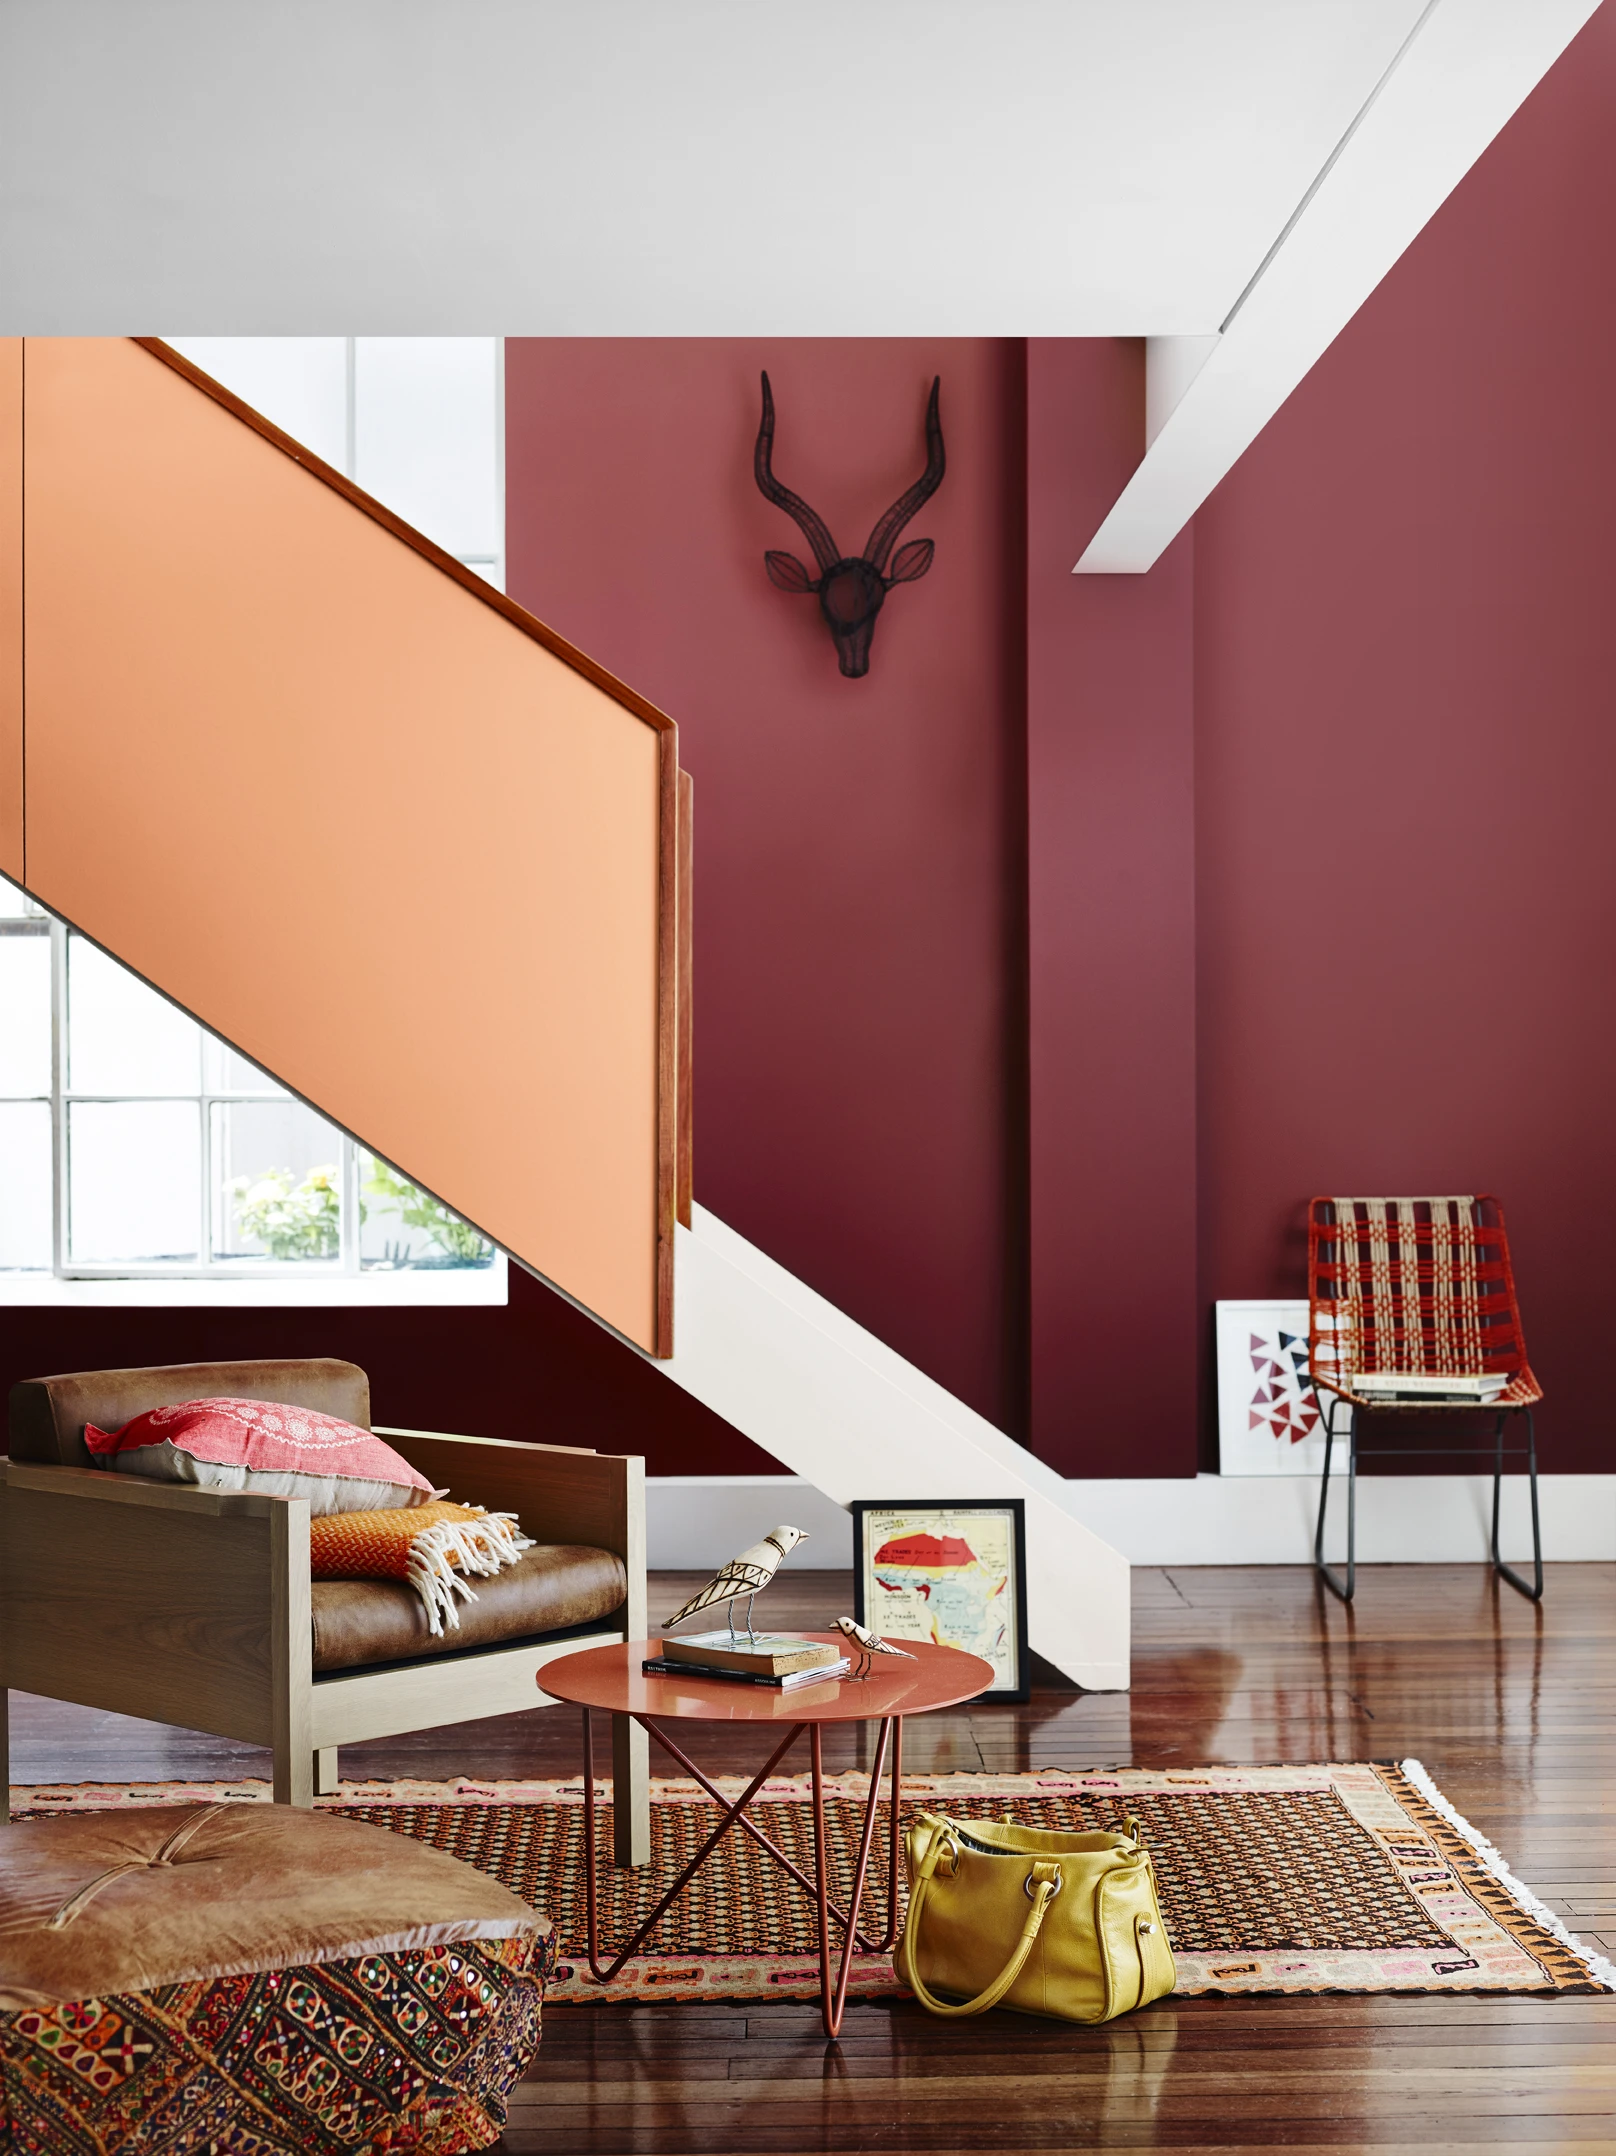 Red wall with animal head on the wall and orange stairs